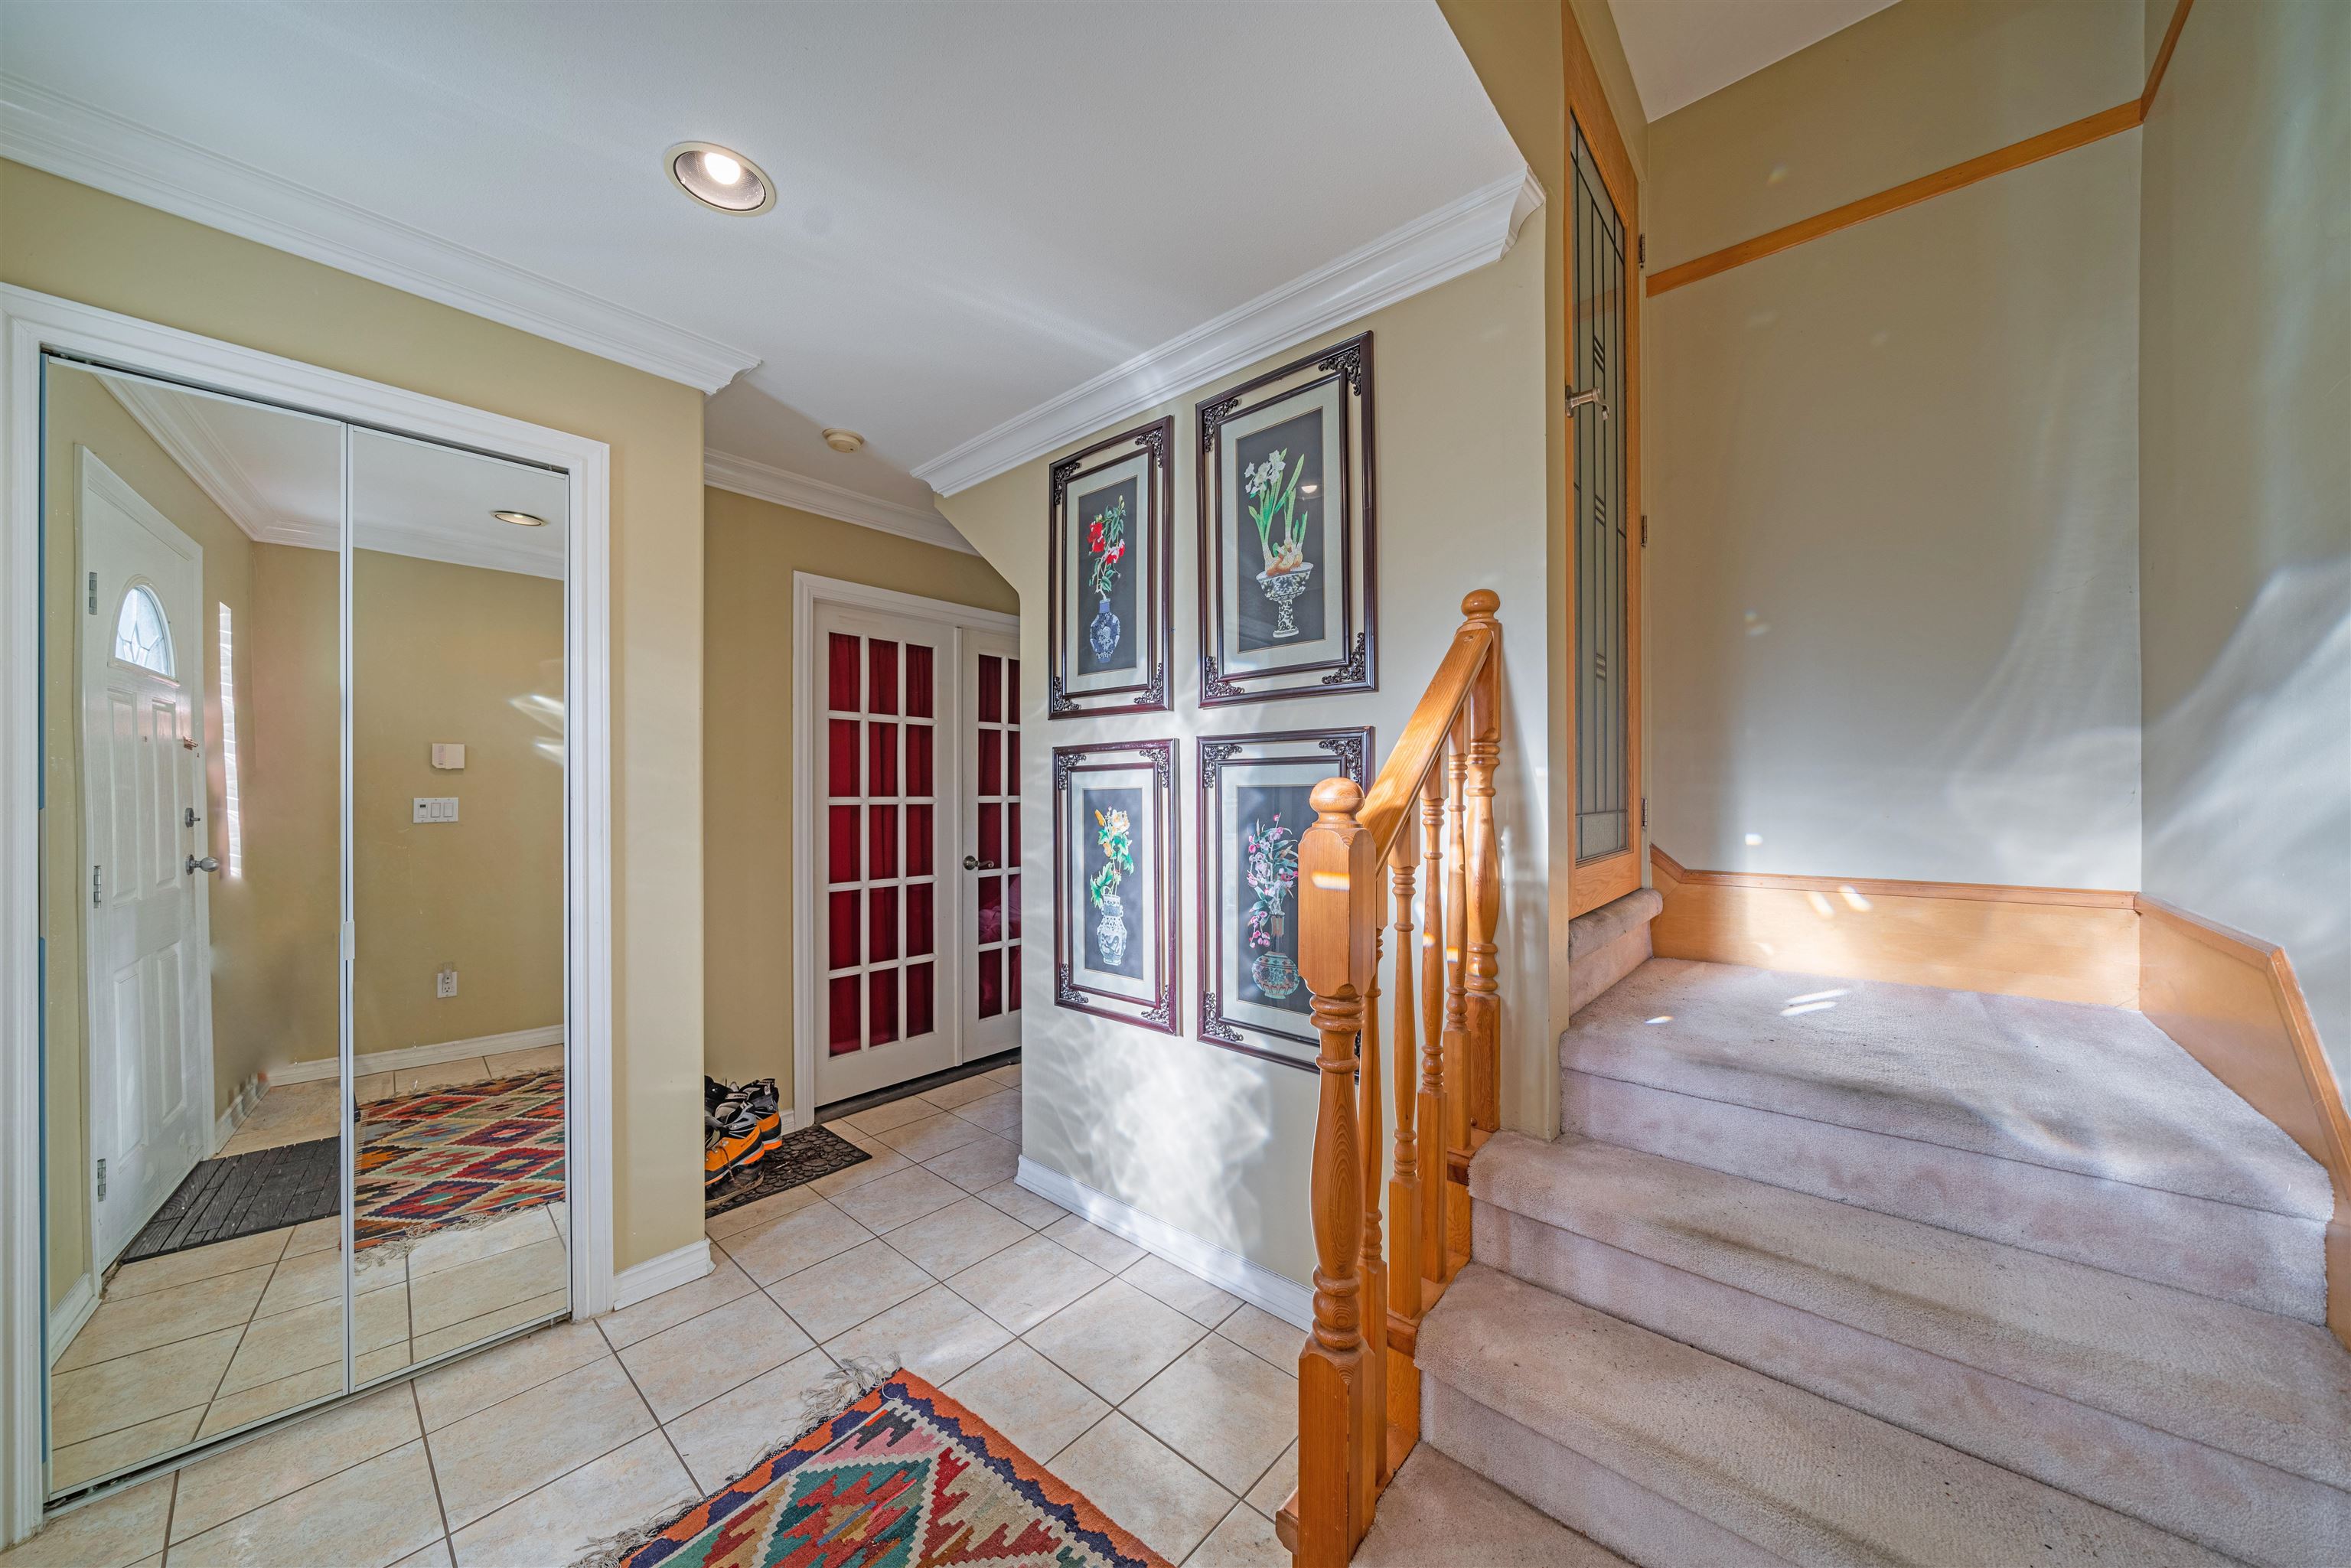 Listing image of 2052 WESTVIEW DRIVE